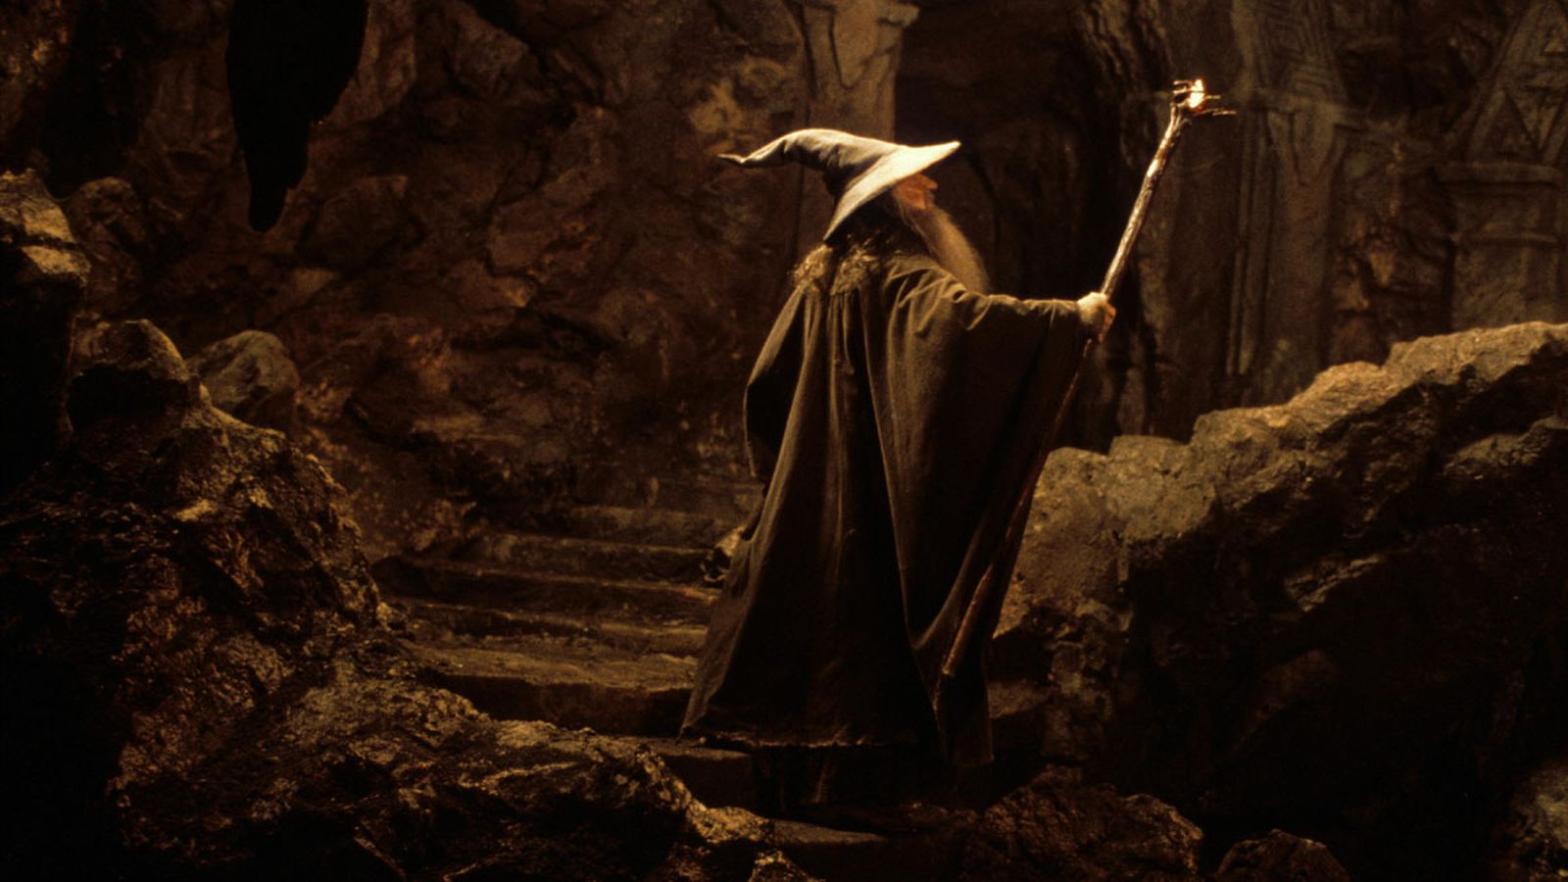 If you're a money wizard, you could own the Lord of the Rings. (Image: New Line Cinema)